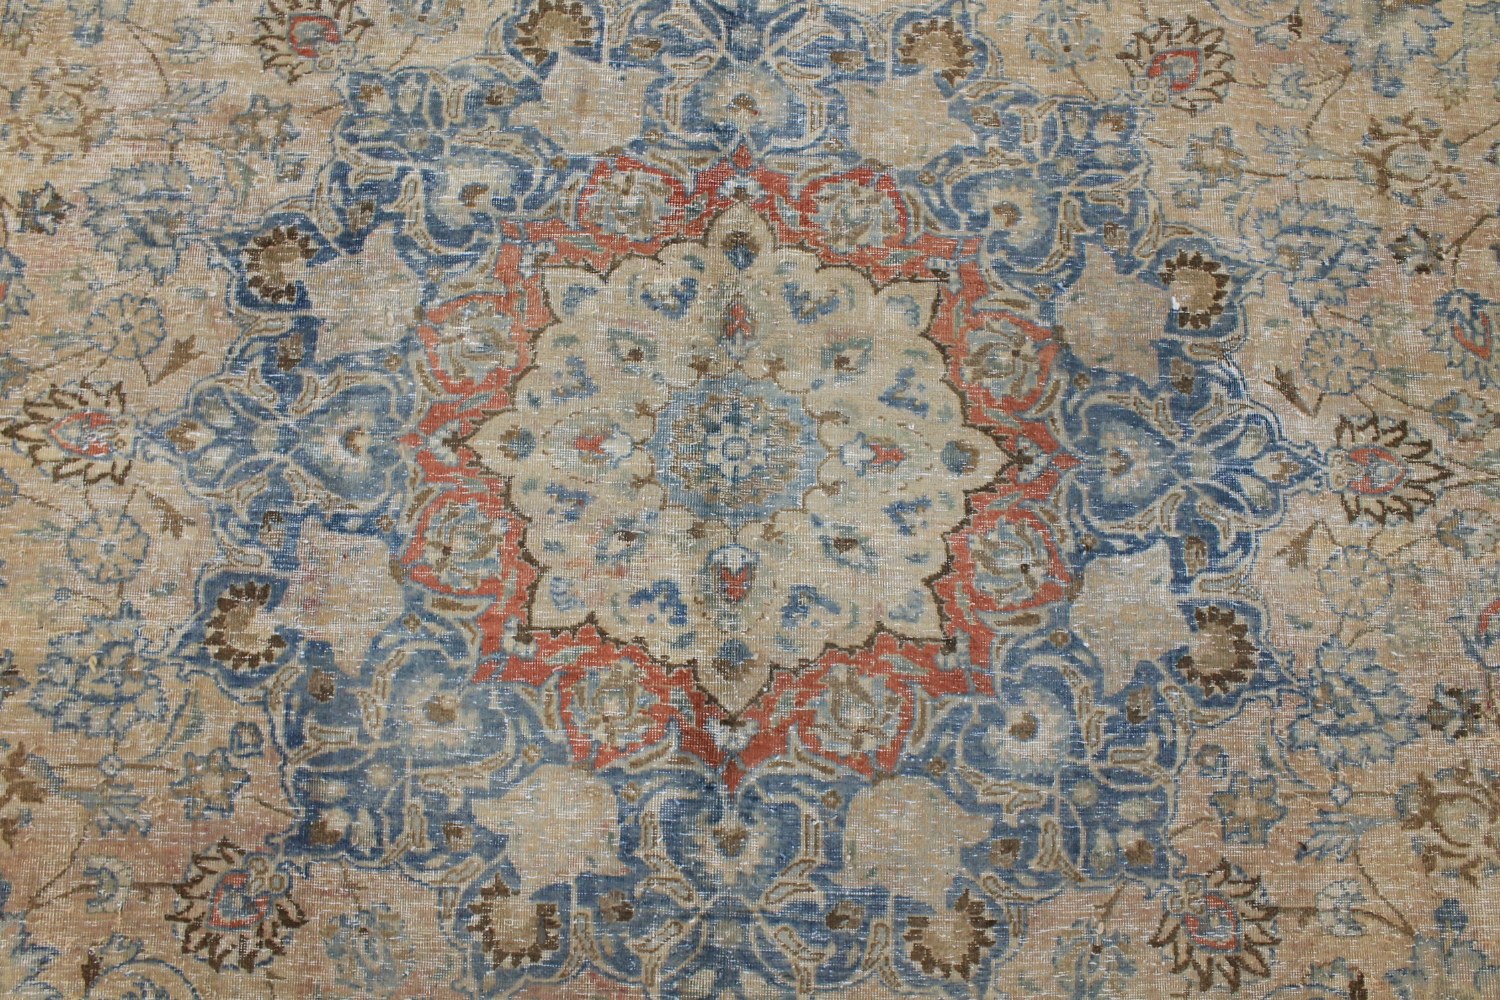 9x12 Aryana & Antique Revivals Hand Knotted Wool Area Rug - MR028282